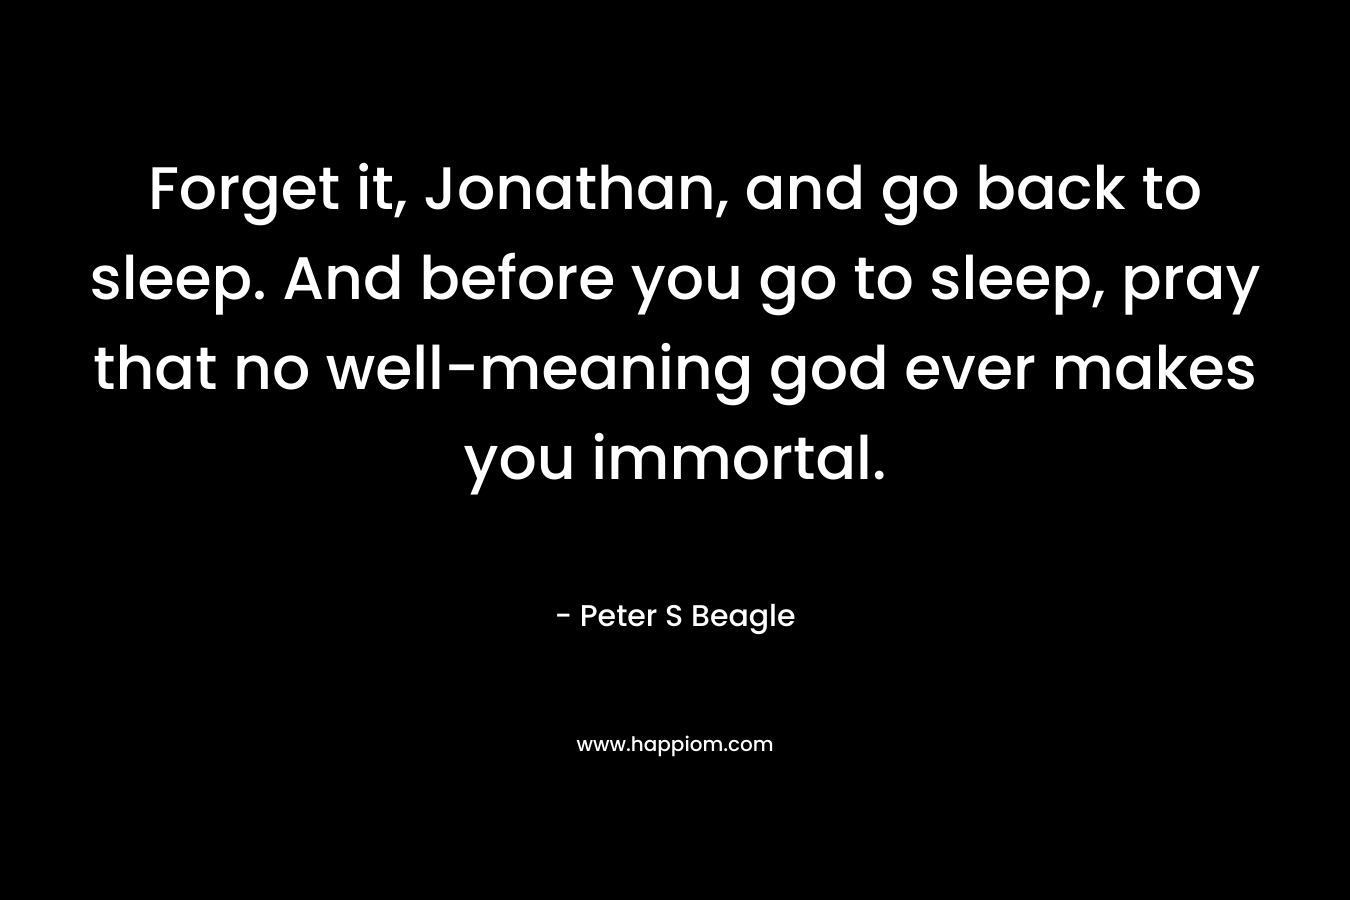 Forget it, Jonathan, and go back to sleep. And before you go to sleep, pray that no well-meaning god ever makes you immortal. – Peter S Beagle